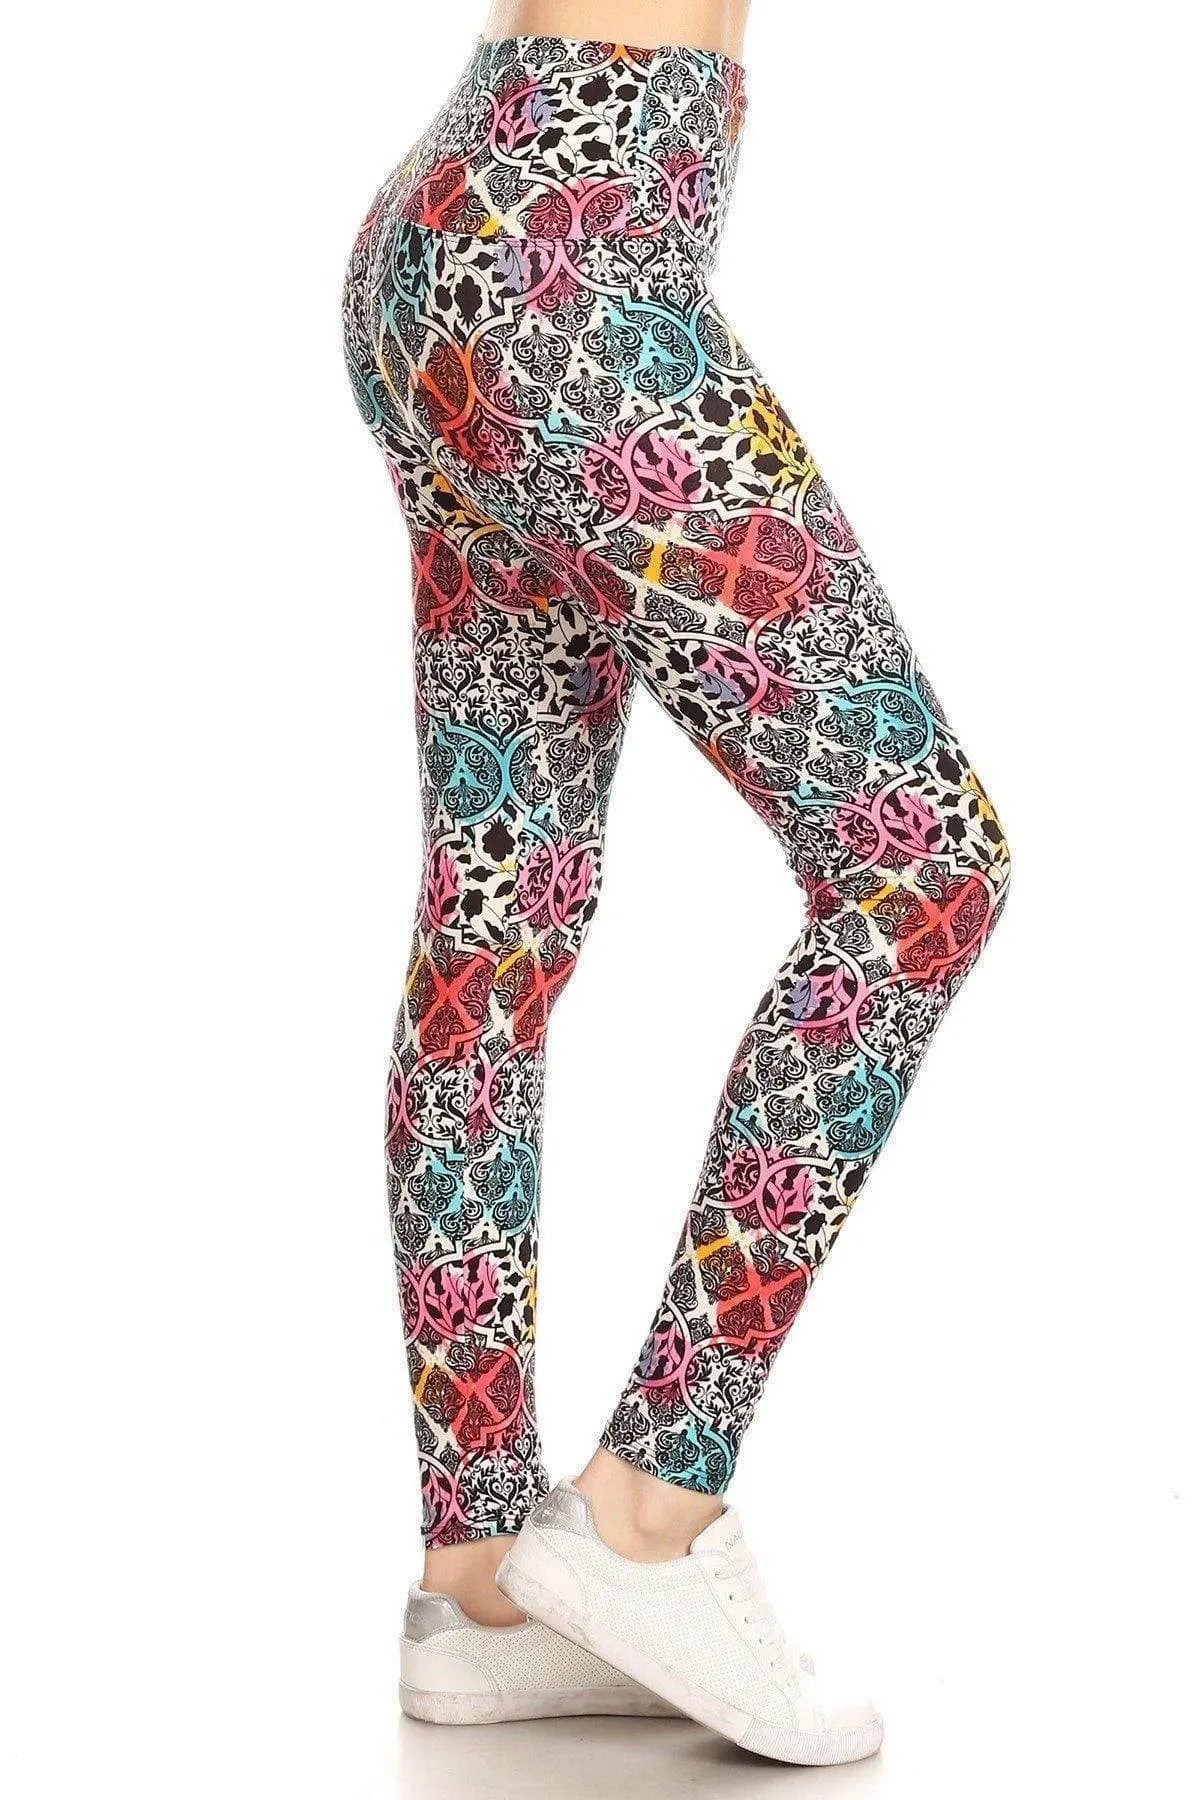 5-inch Long Yoga Style Banded Lined Damask Pattern Printed Knit Legging With High Waist Blue Zone Planet